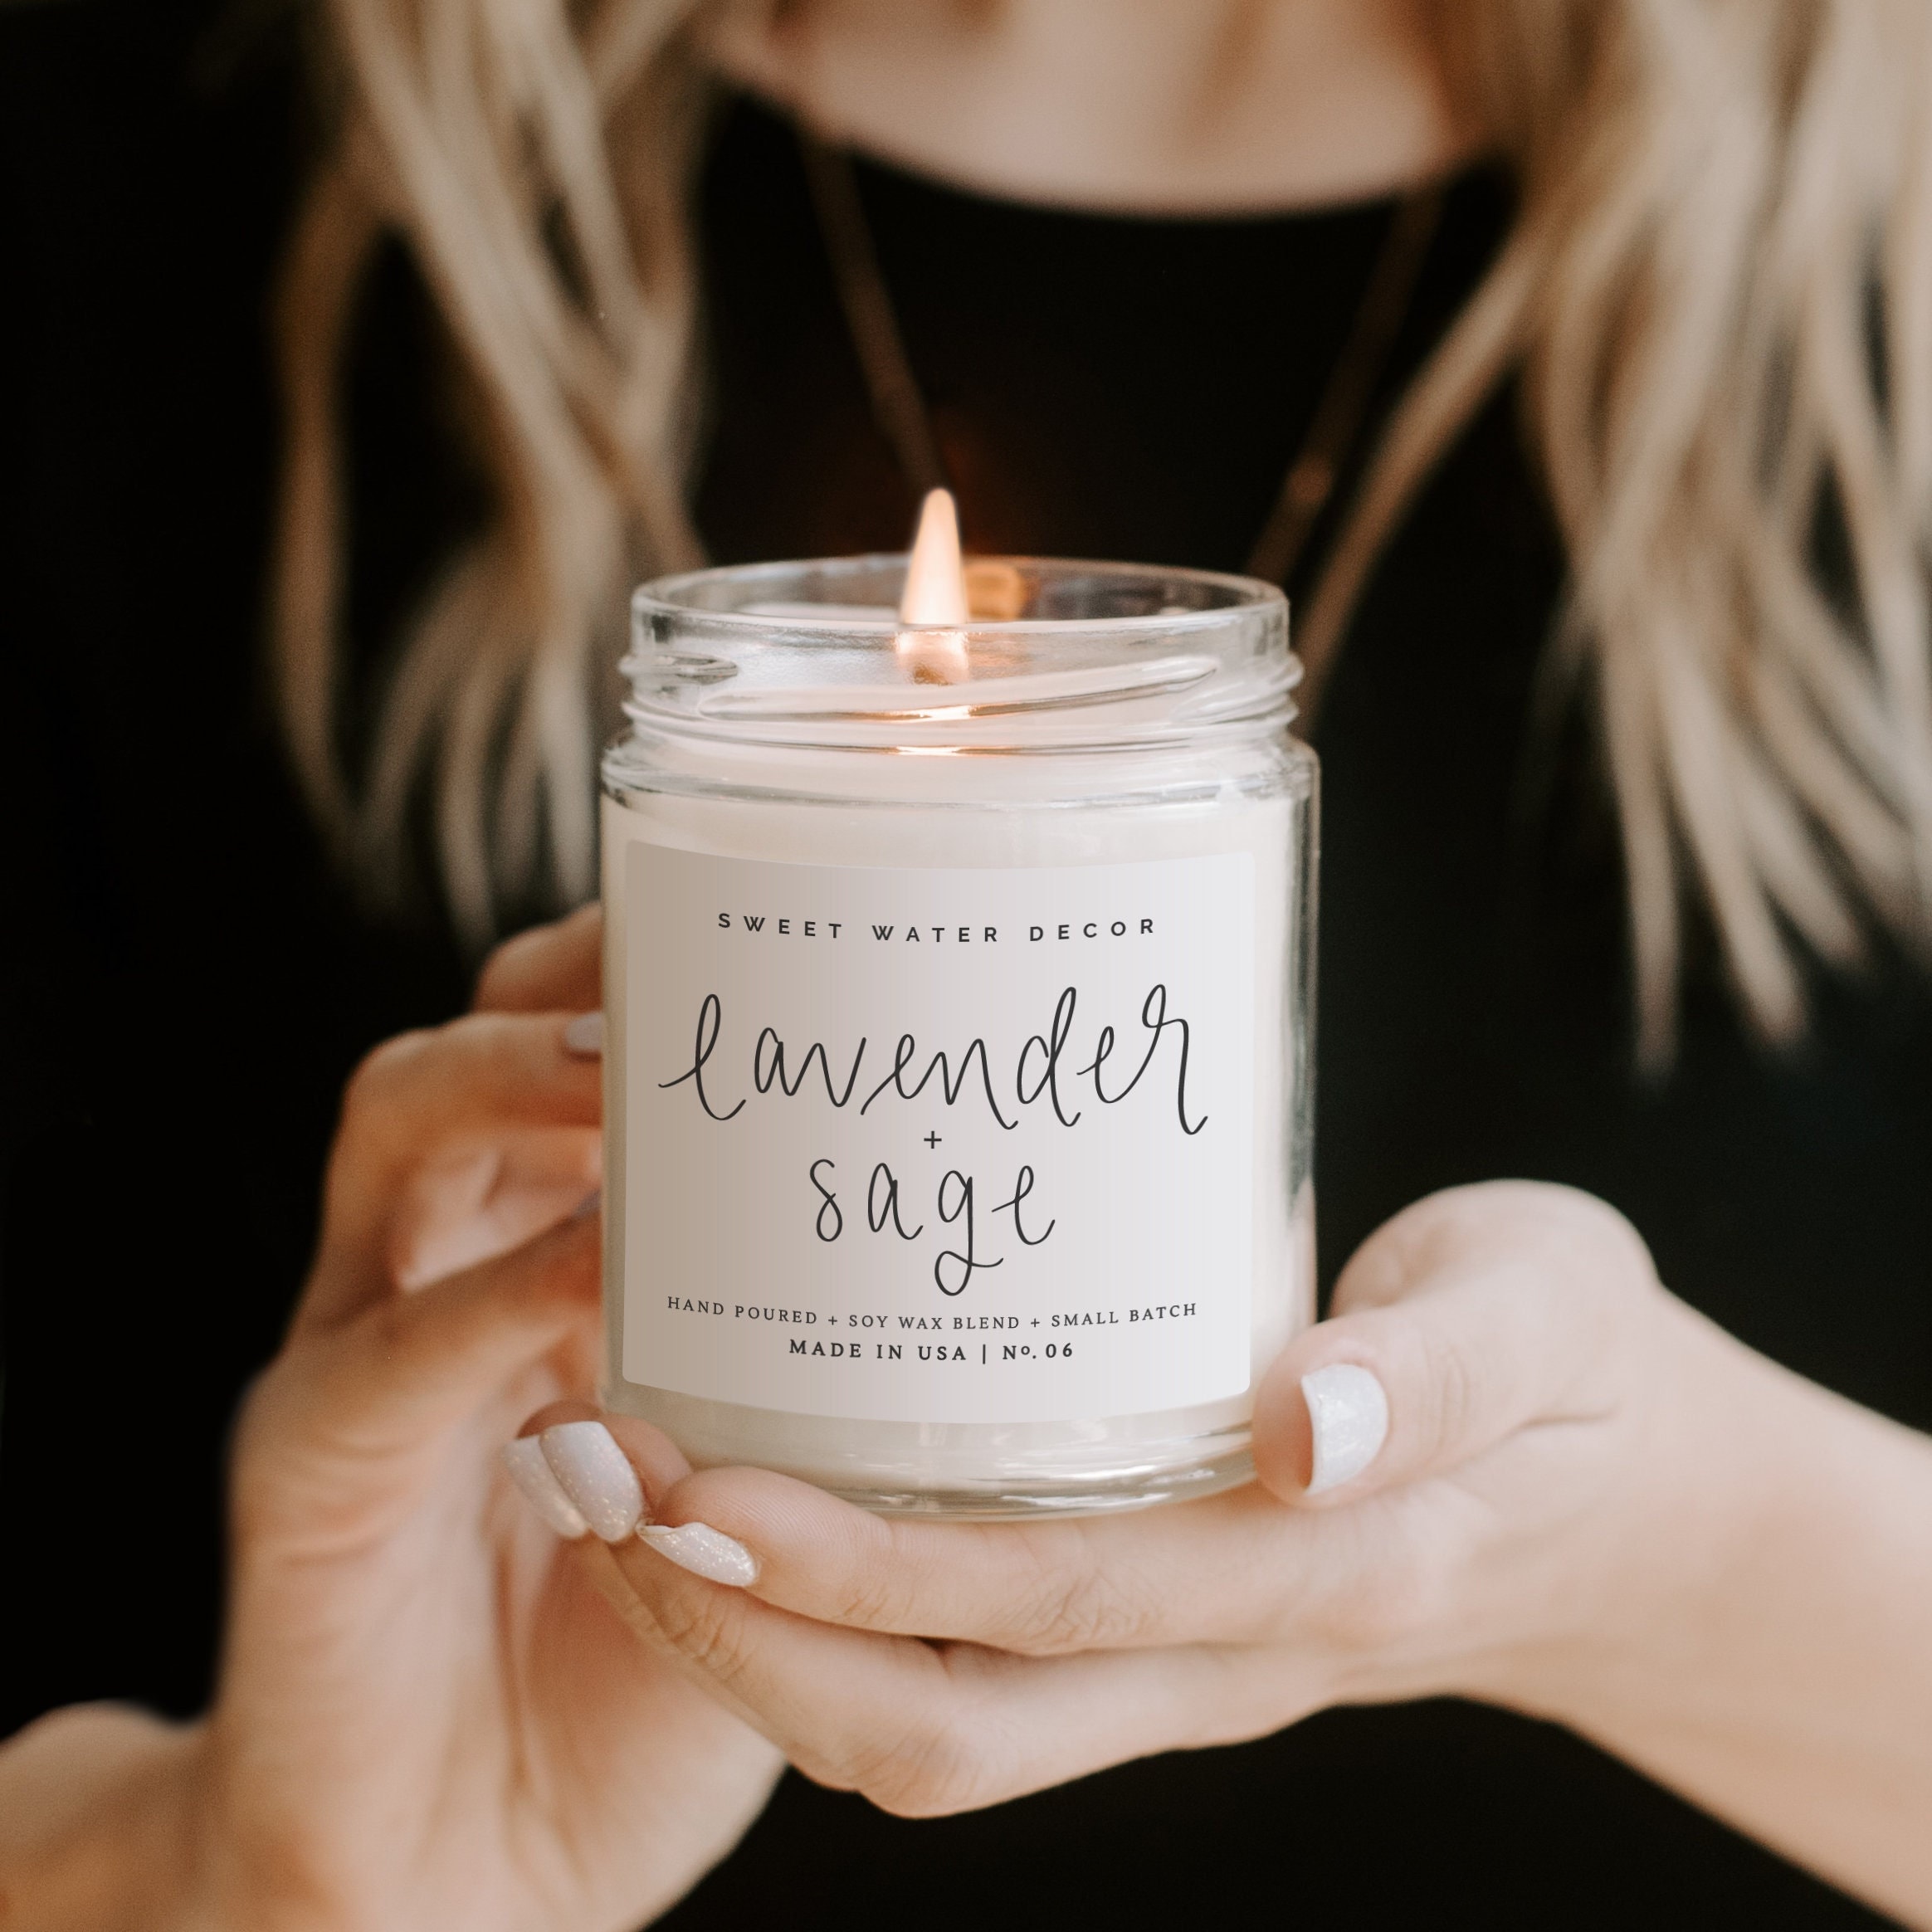 Natural Scented Soy Mom Best Friend Candle Made in the USA 8 oz Handpoured and Small Batch Coconut Blend Wax with 100% Cotton Wick Jasmine Vanilla Scent